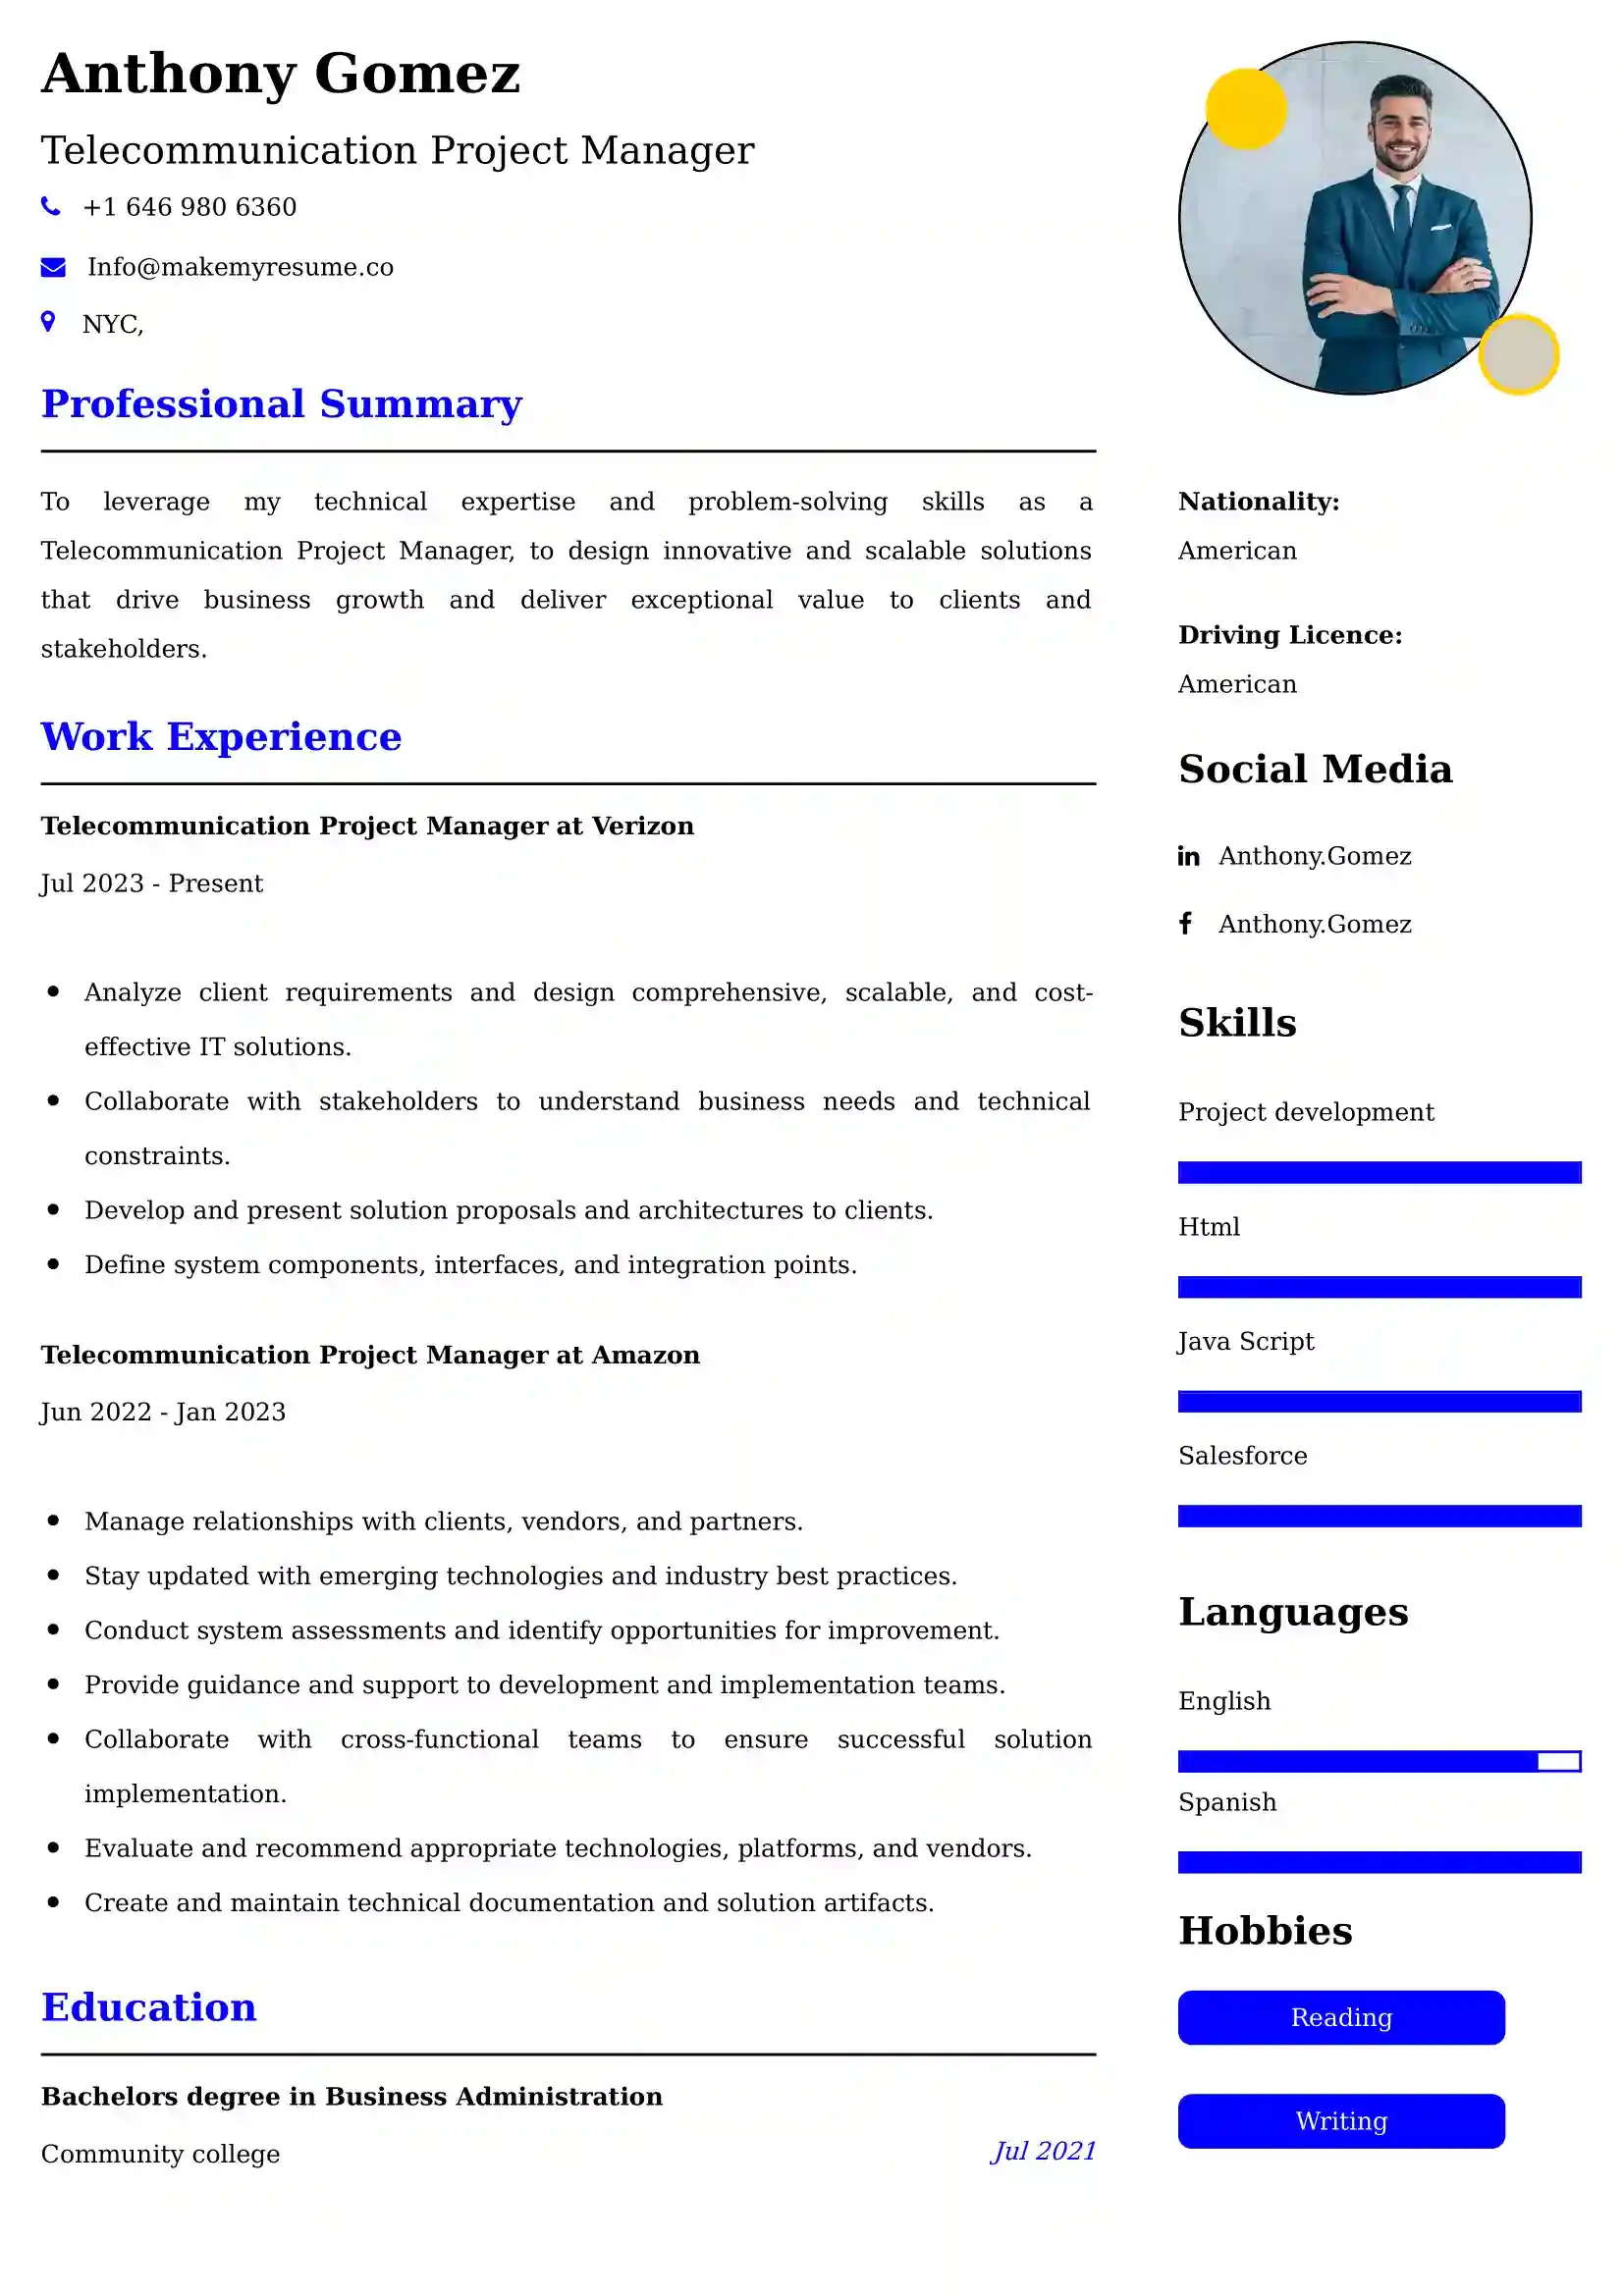 Telecommunication Project Manager CV Examples - US Format